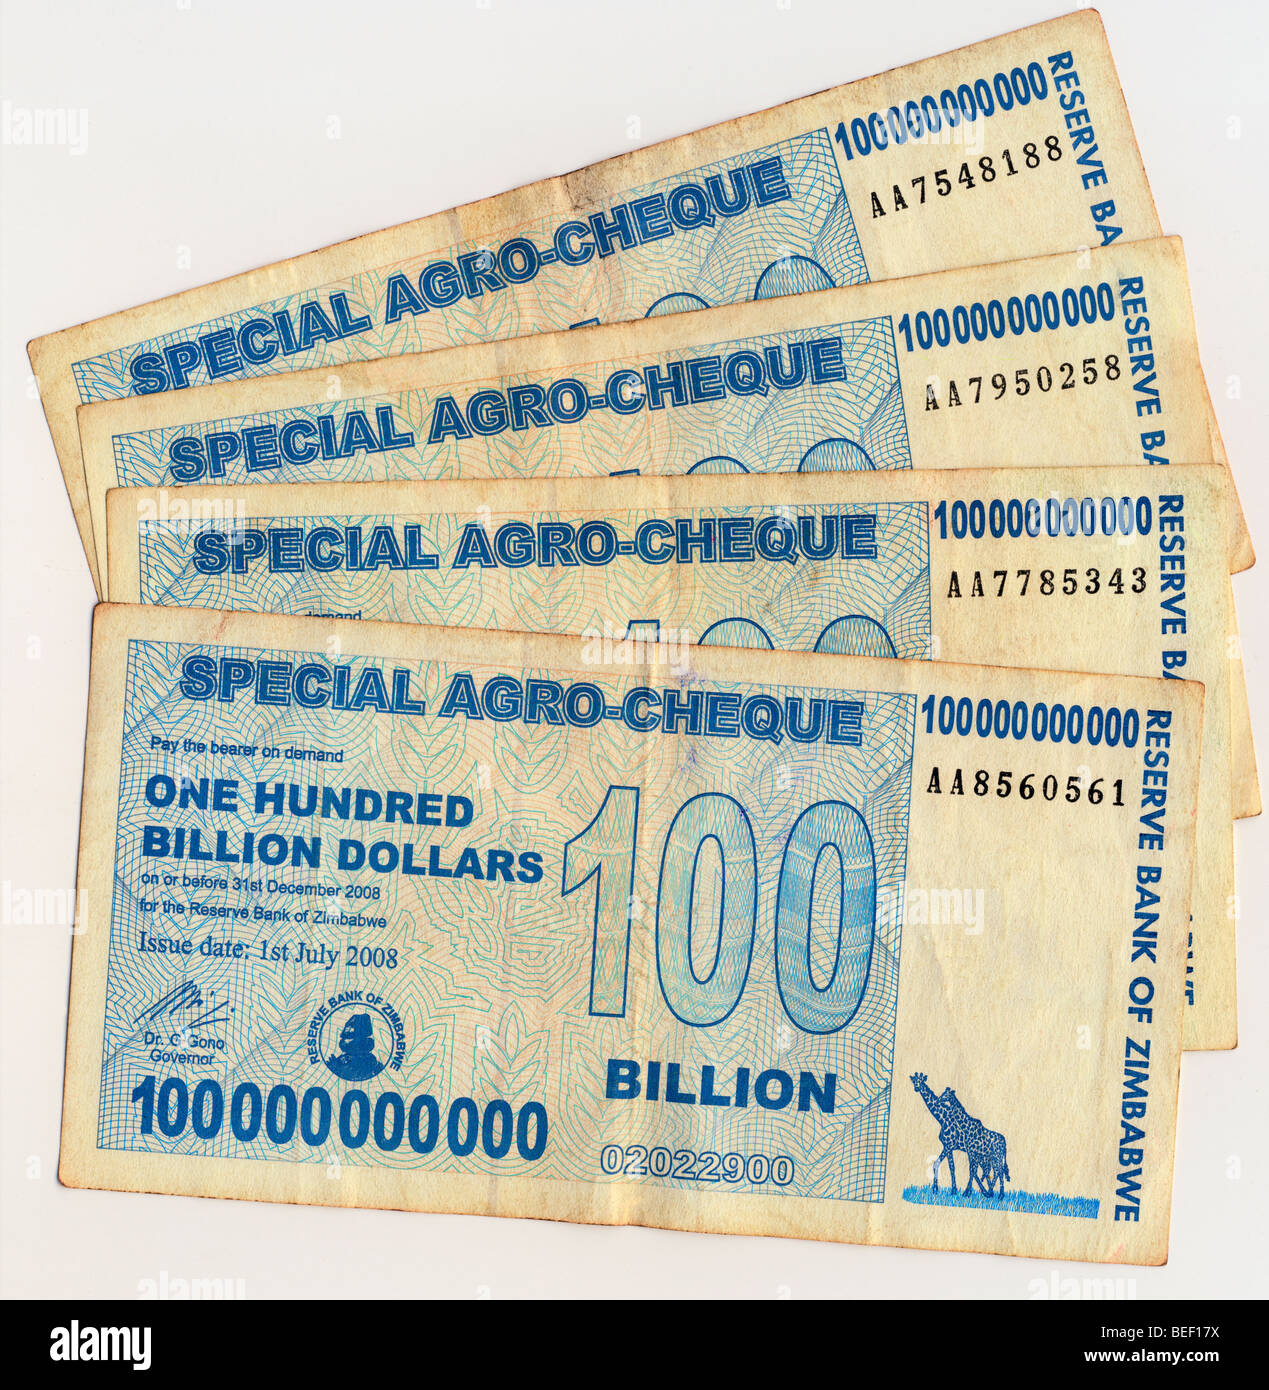 Zimbabwe - Special 100 Billion Dollar Agro-cheques. This money is unique in that it has a 'use before date' printed on it. Stock Photo